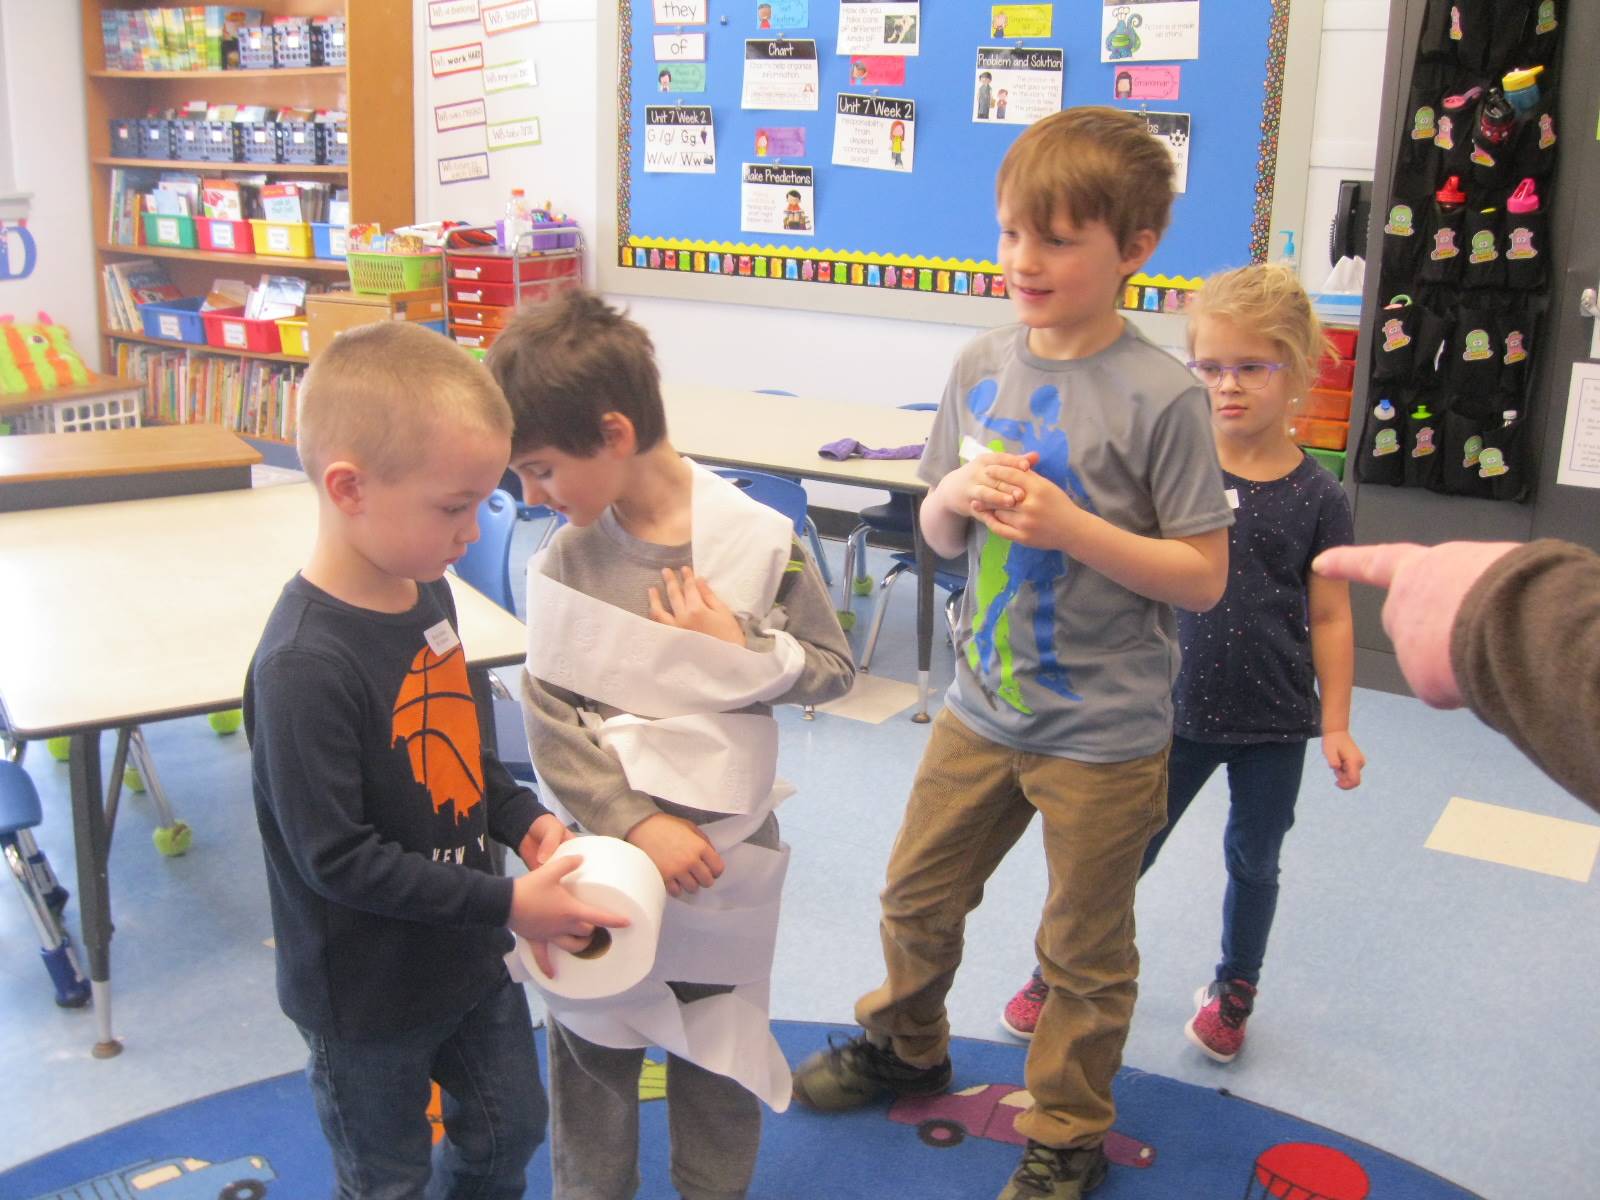 4 students playing a game with toilet paper